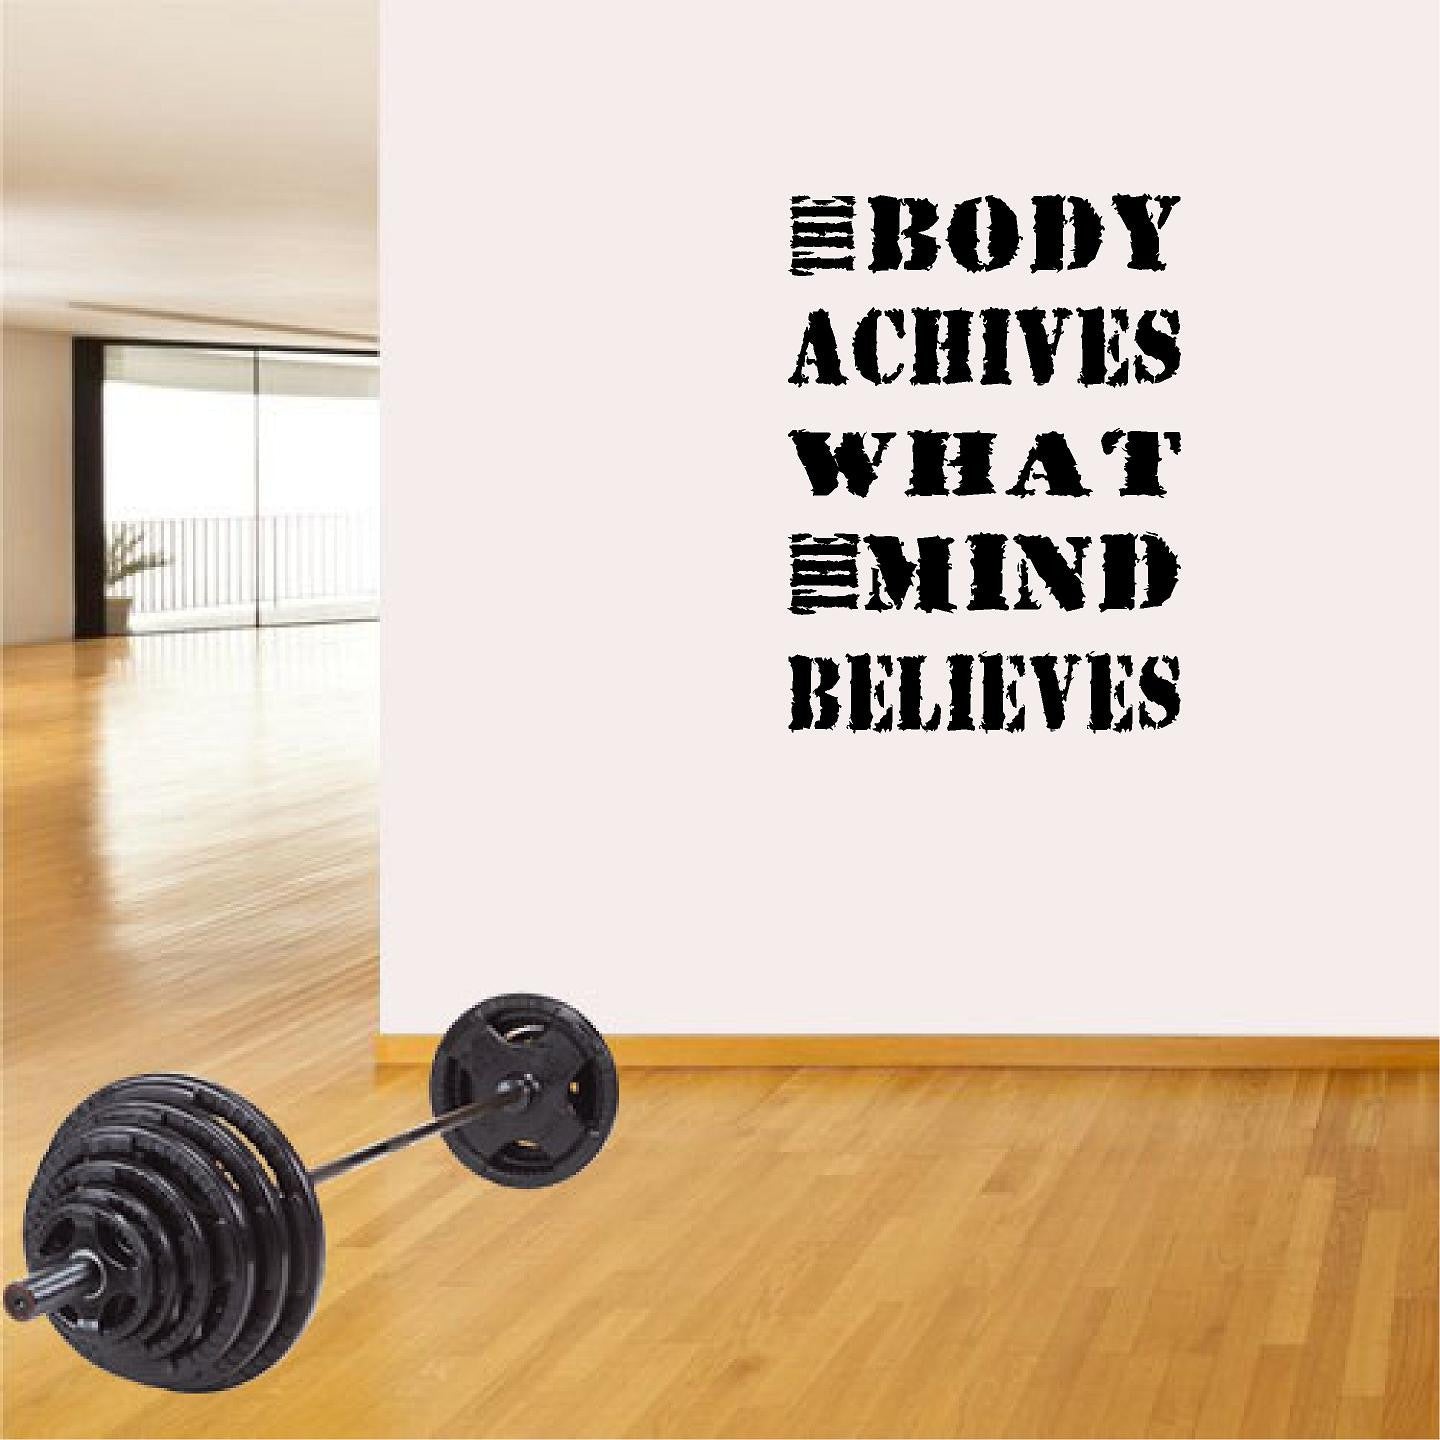 Stickers. Vinyl Wall Decal. Fitness. Gym. Exercise: The Body Achieves What The Mind Believes